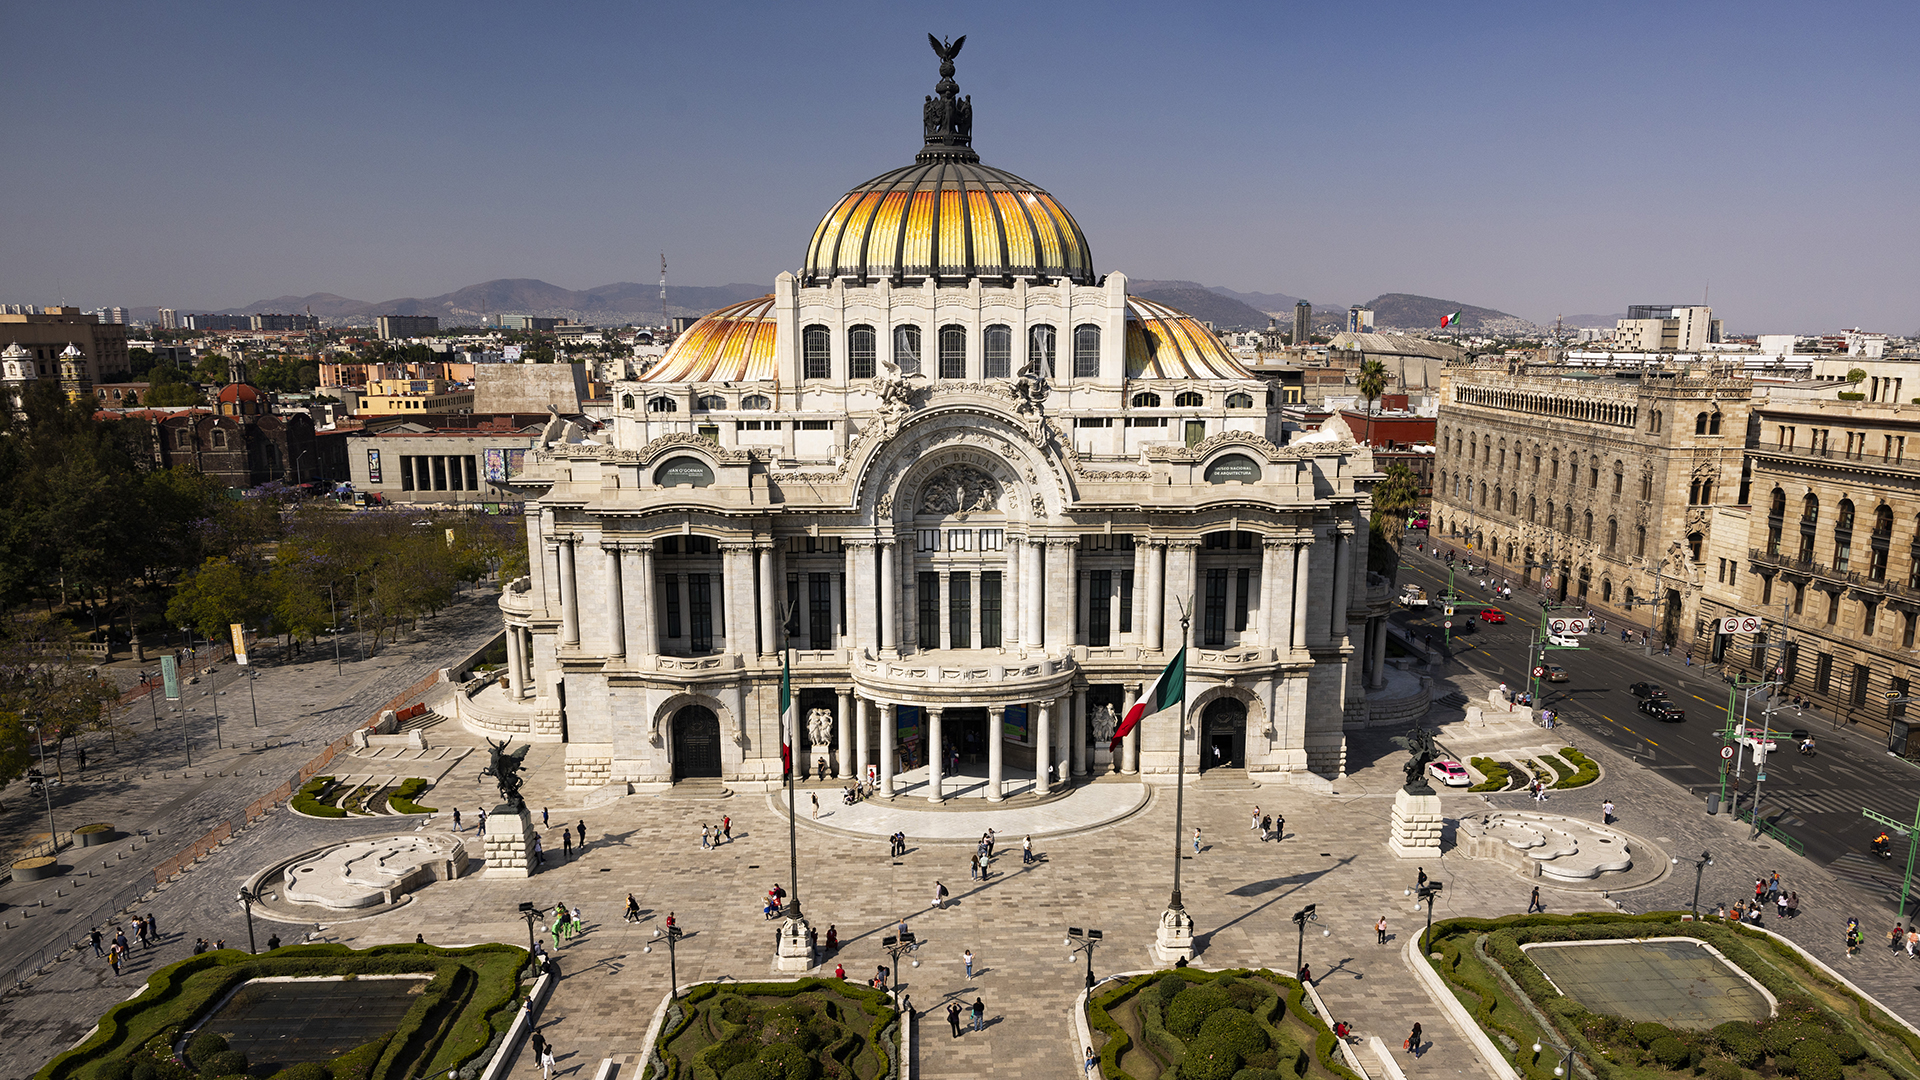 Explore Food, Art and Architecture in Mexico City